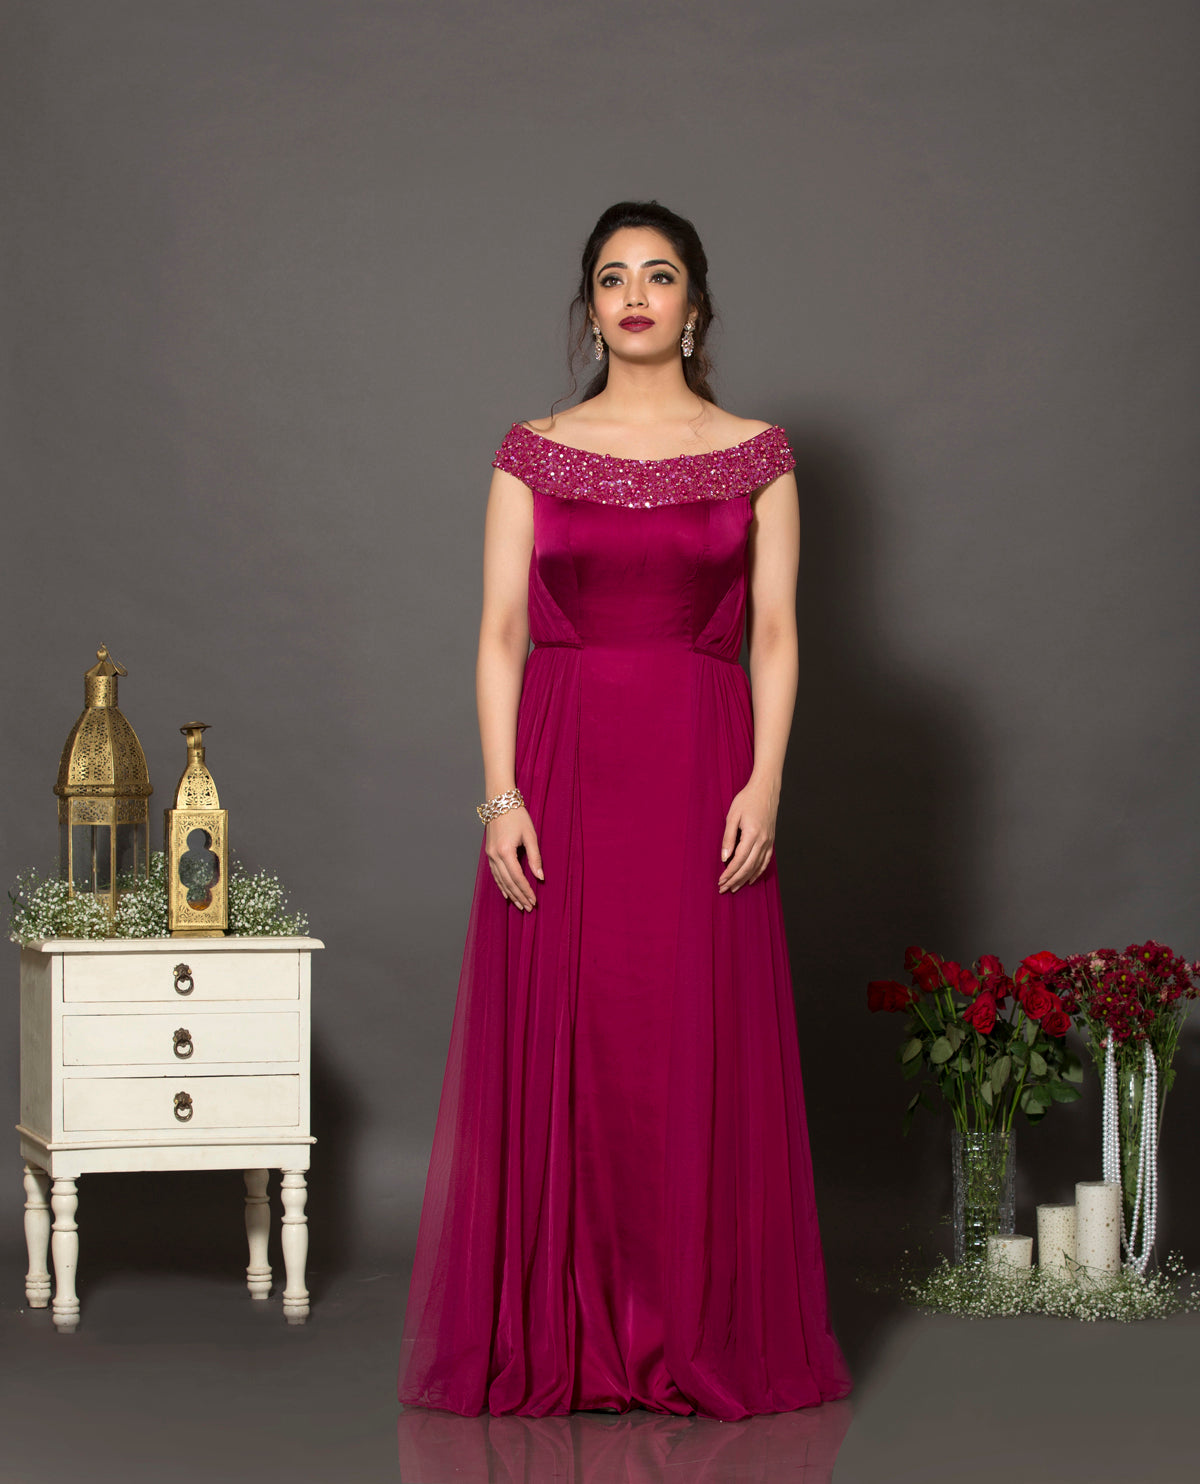 A beautiful satin georgette and soft net gown with the neckline highlighted using sequins and pearls.